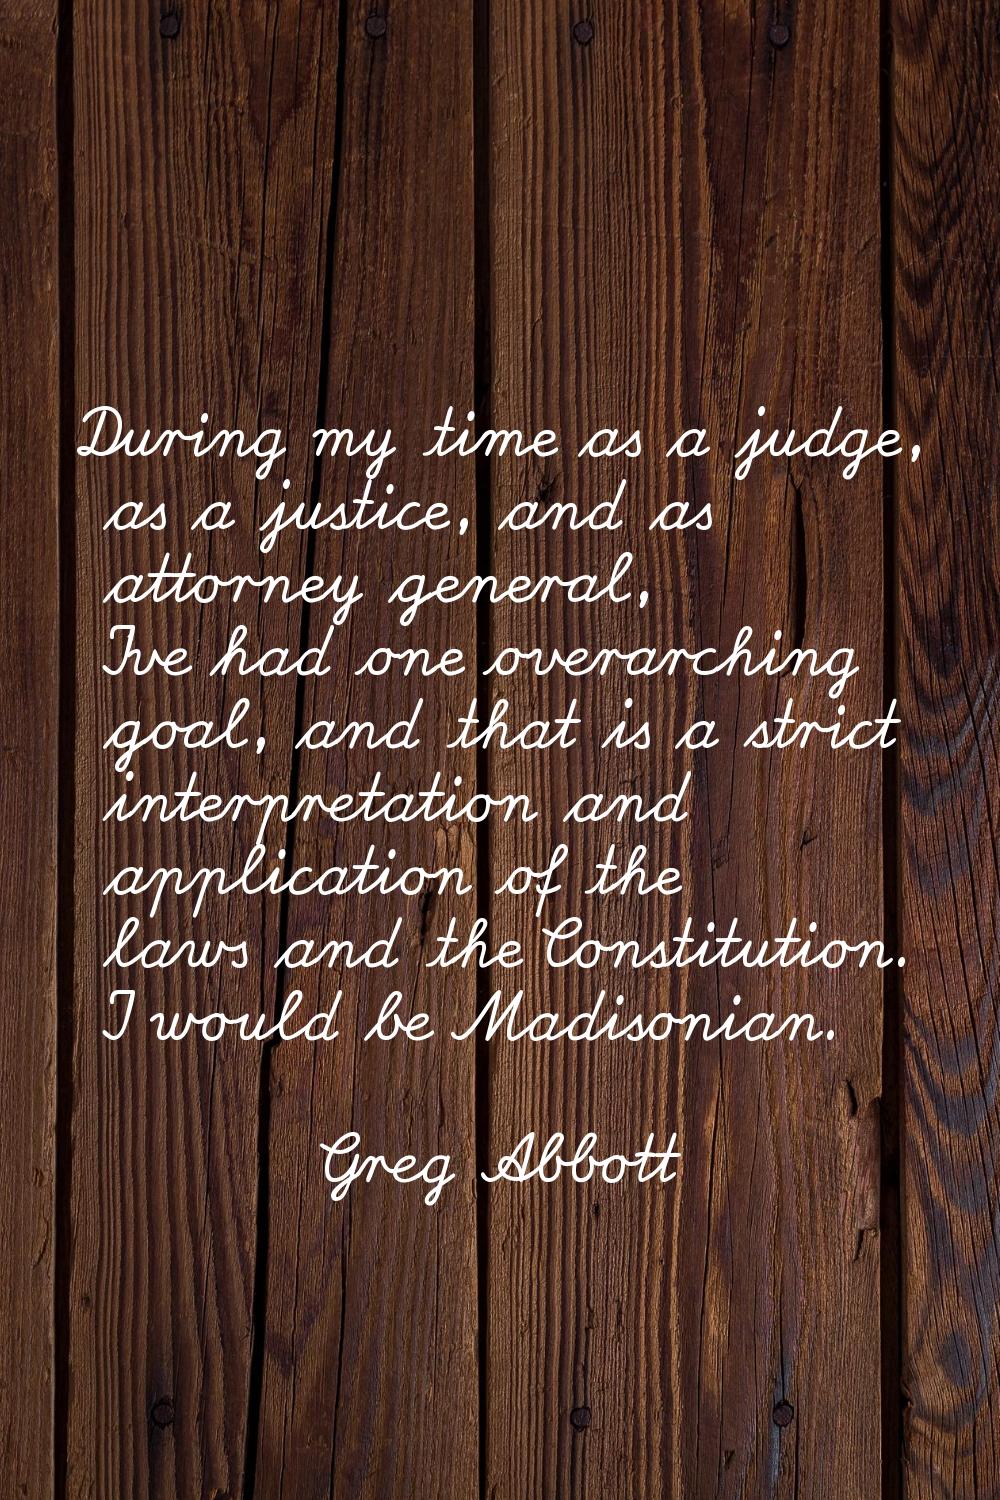 During my time as a judge, as a justice, and as attorney general, I've had one overarching goal, an